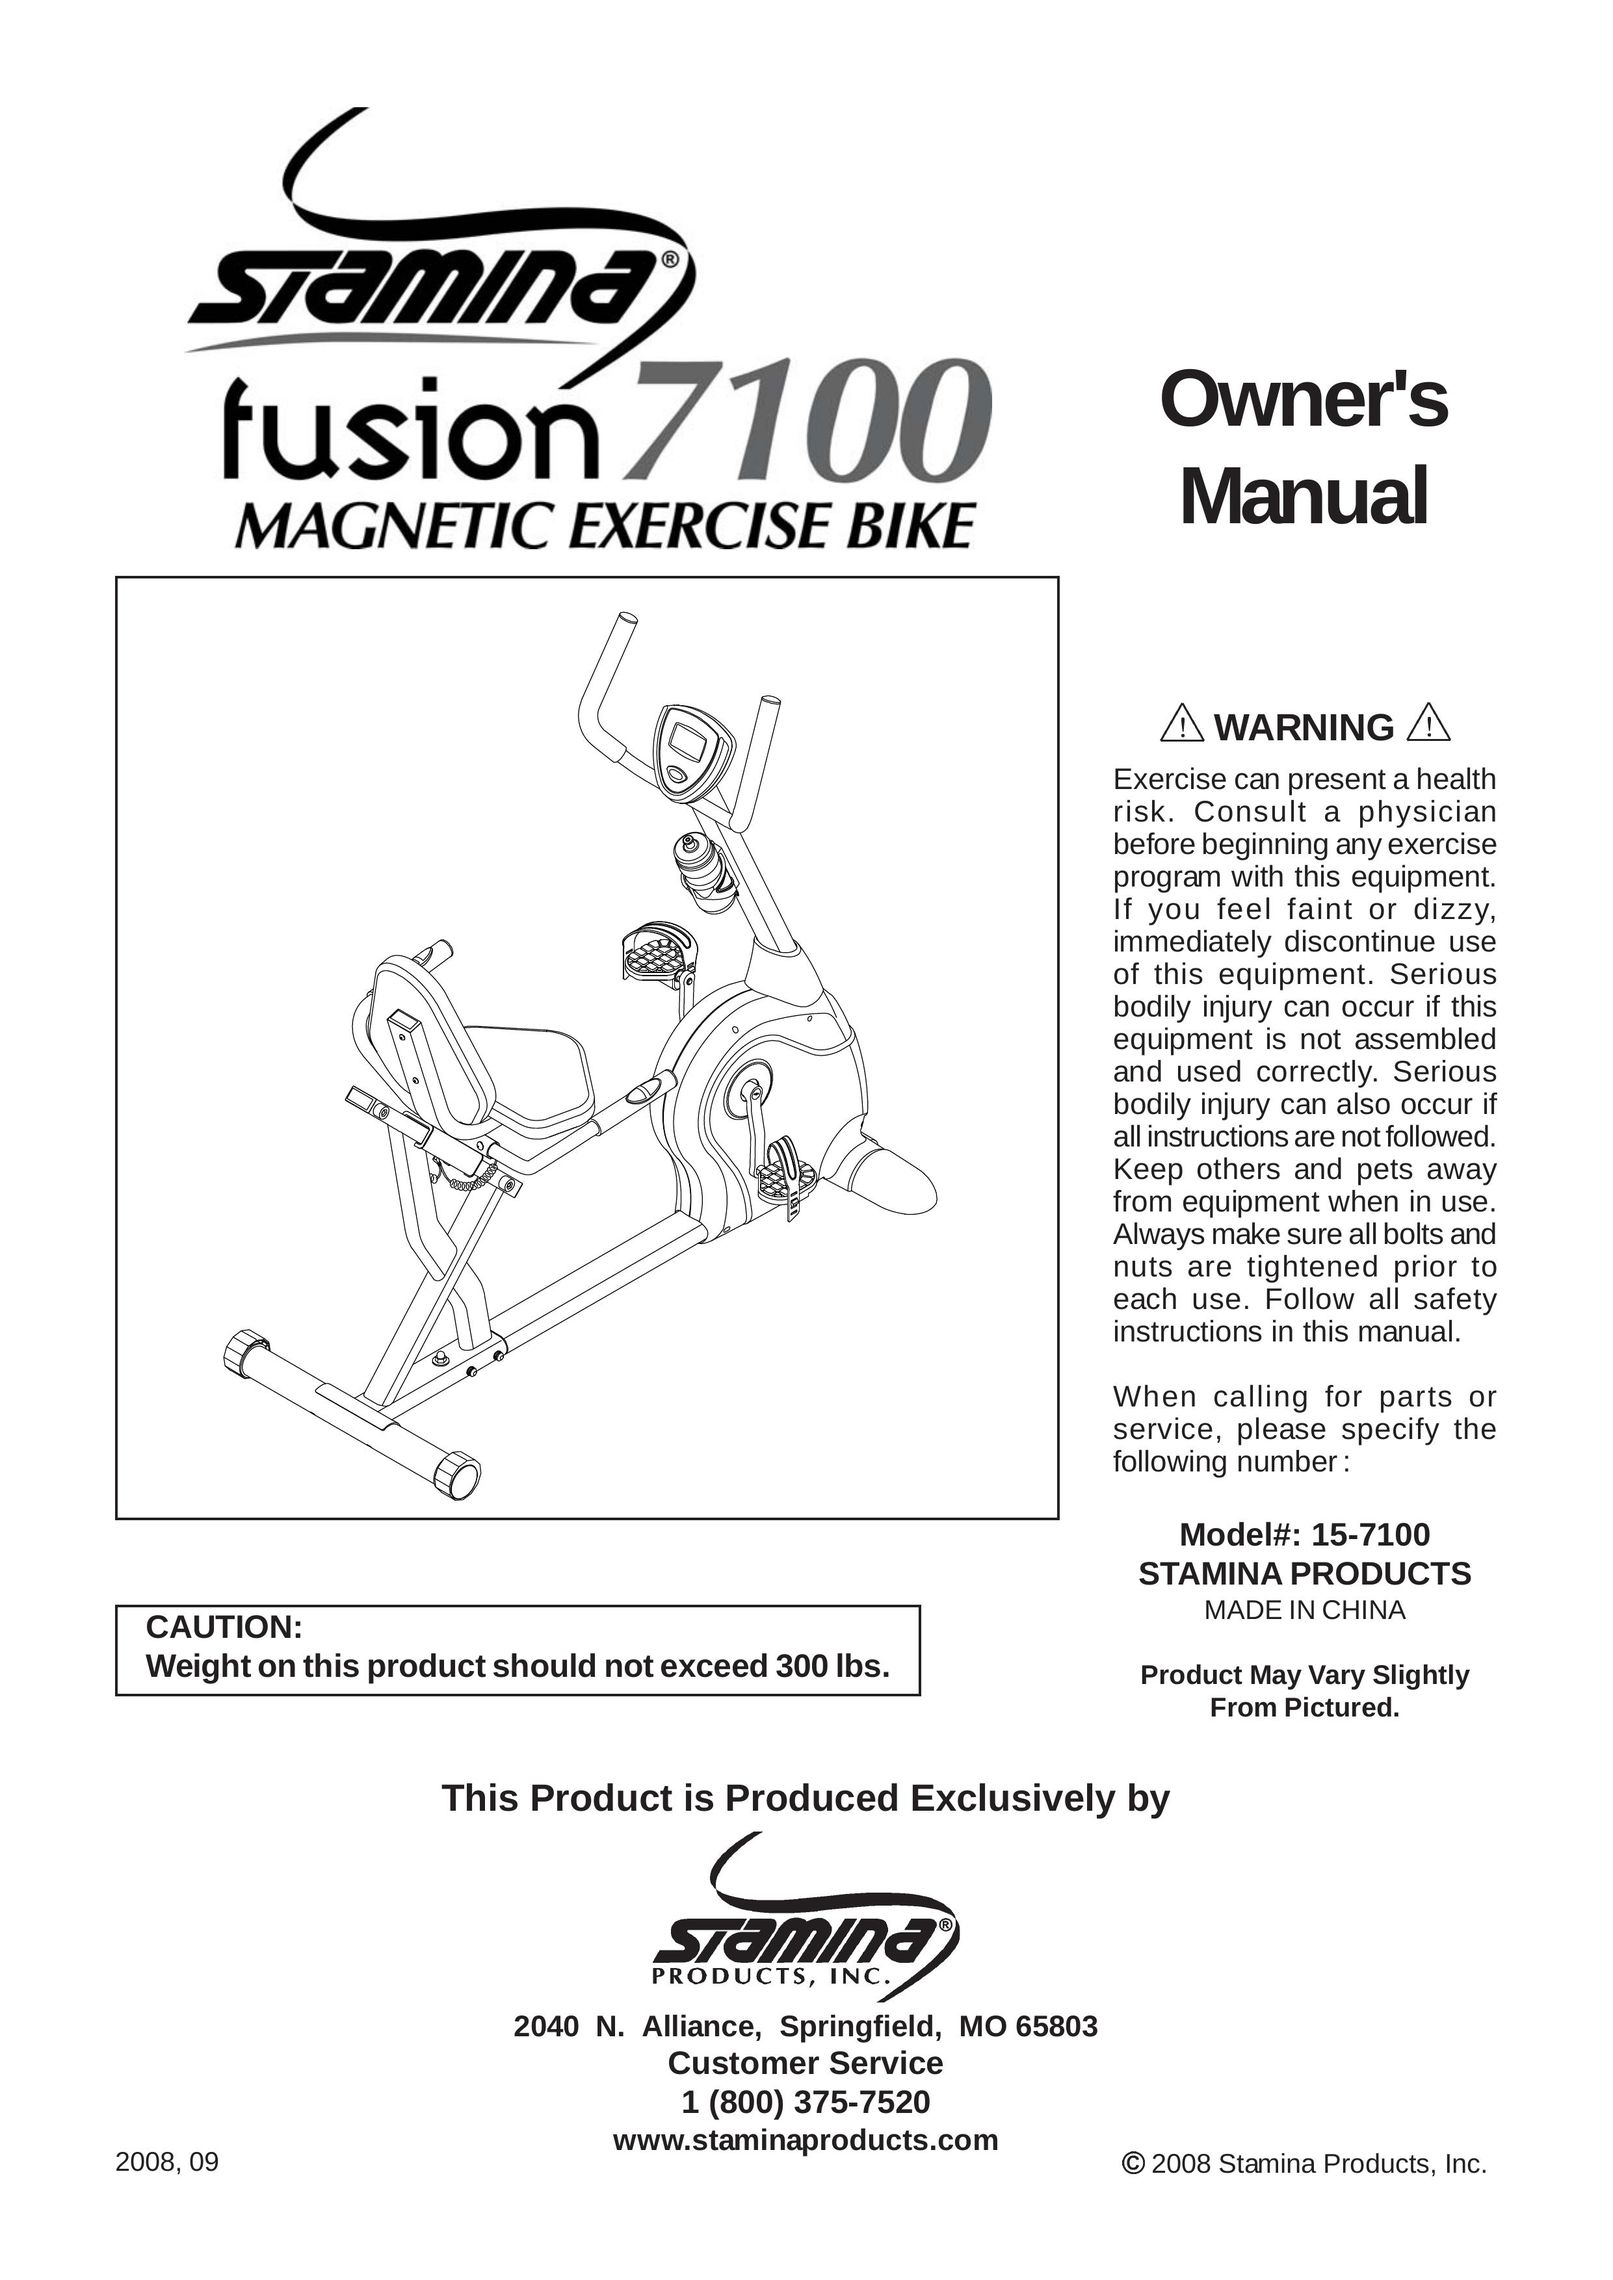 Stamina Products Fusion 7100 Bicycle User Manual